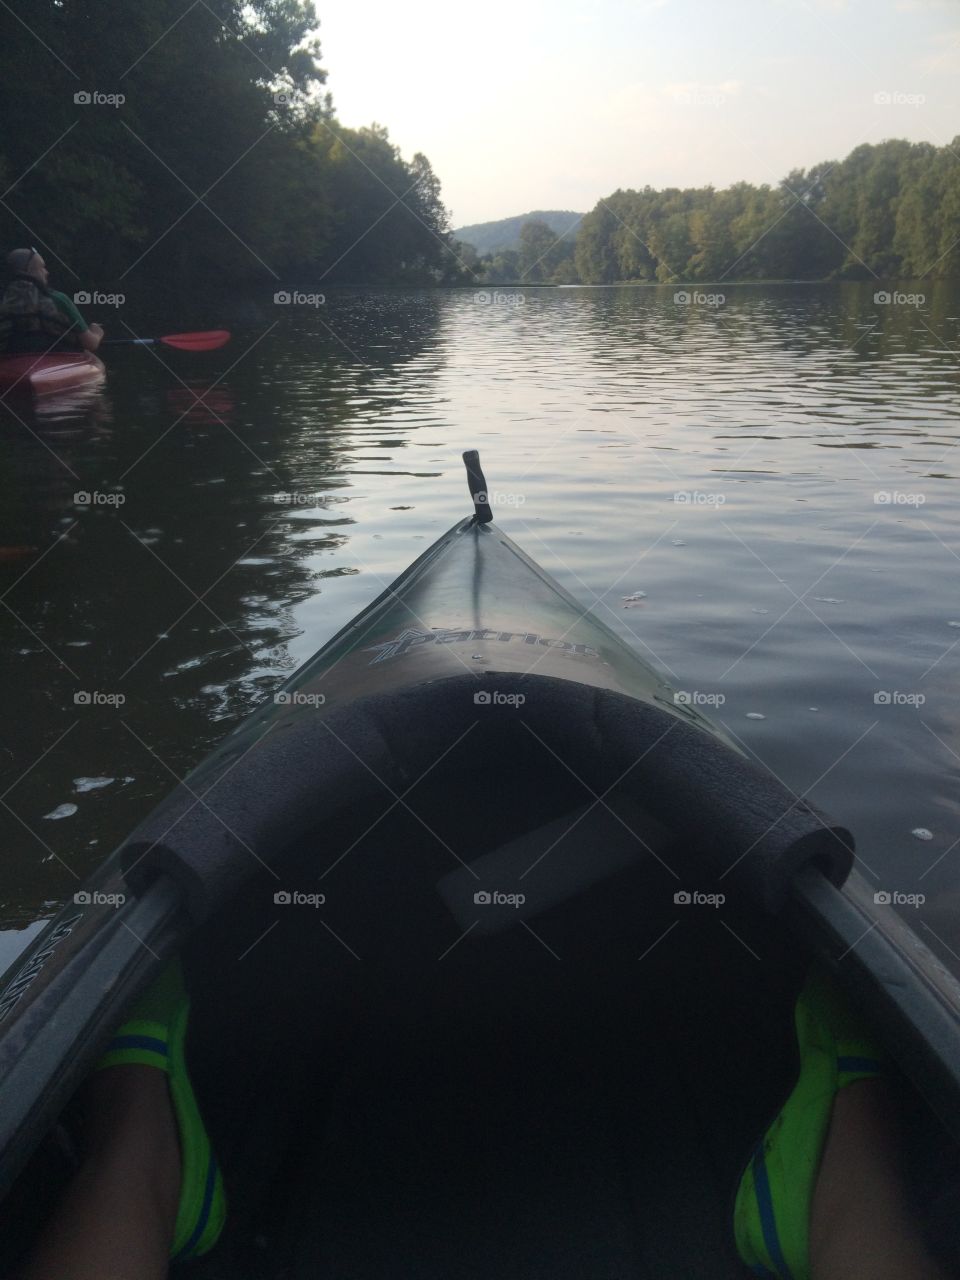 Kayaking on the Yough